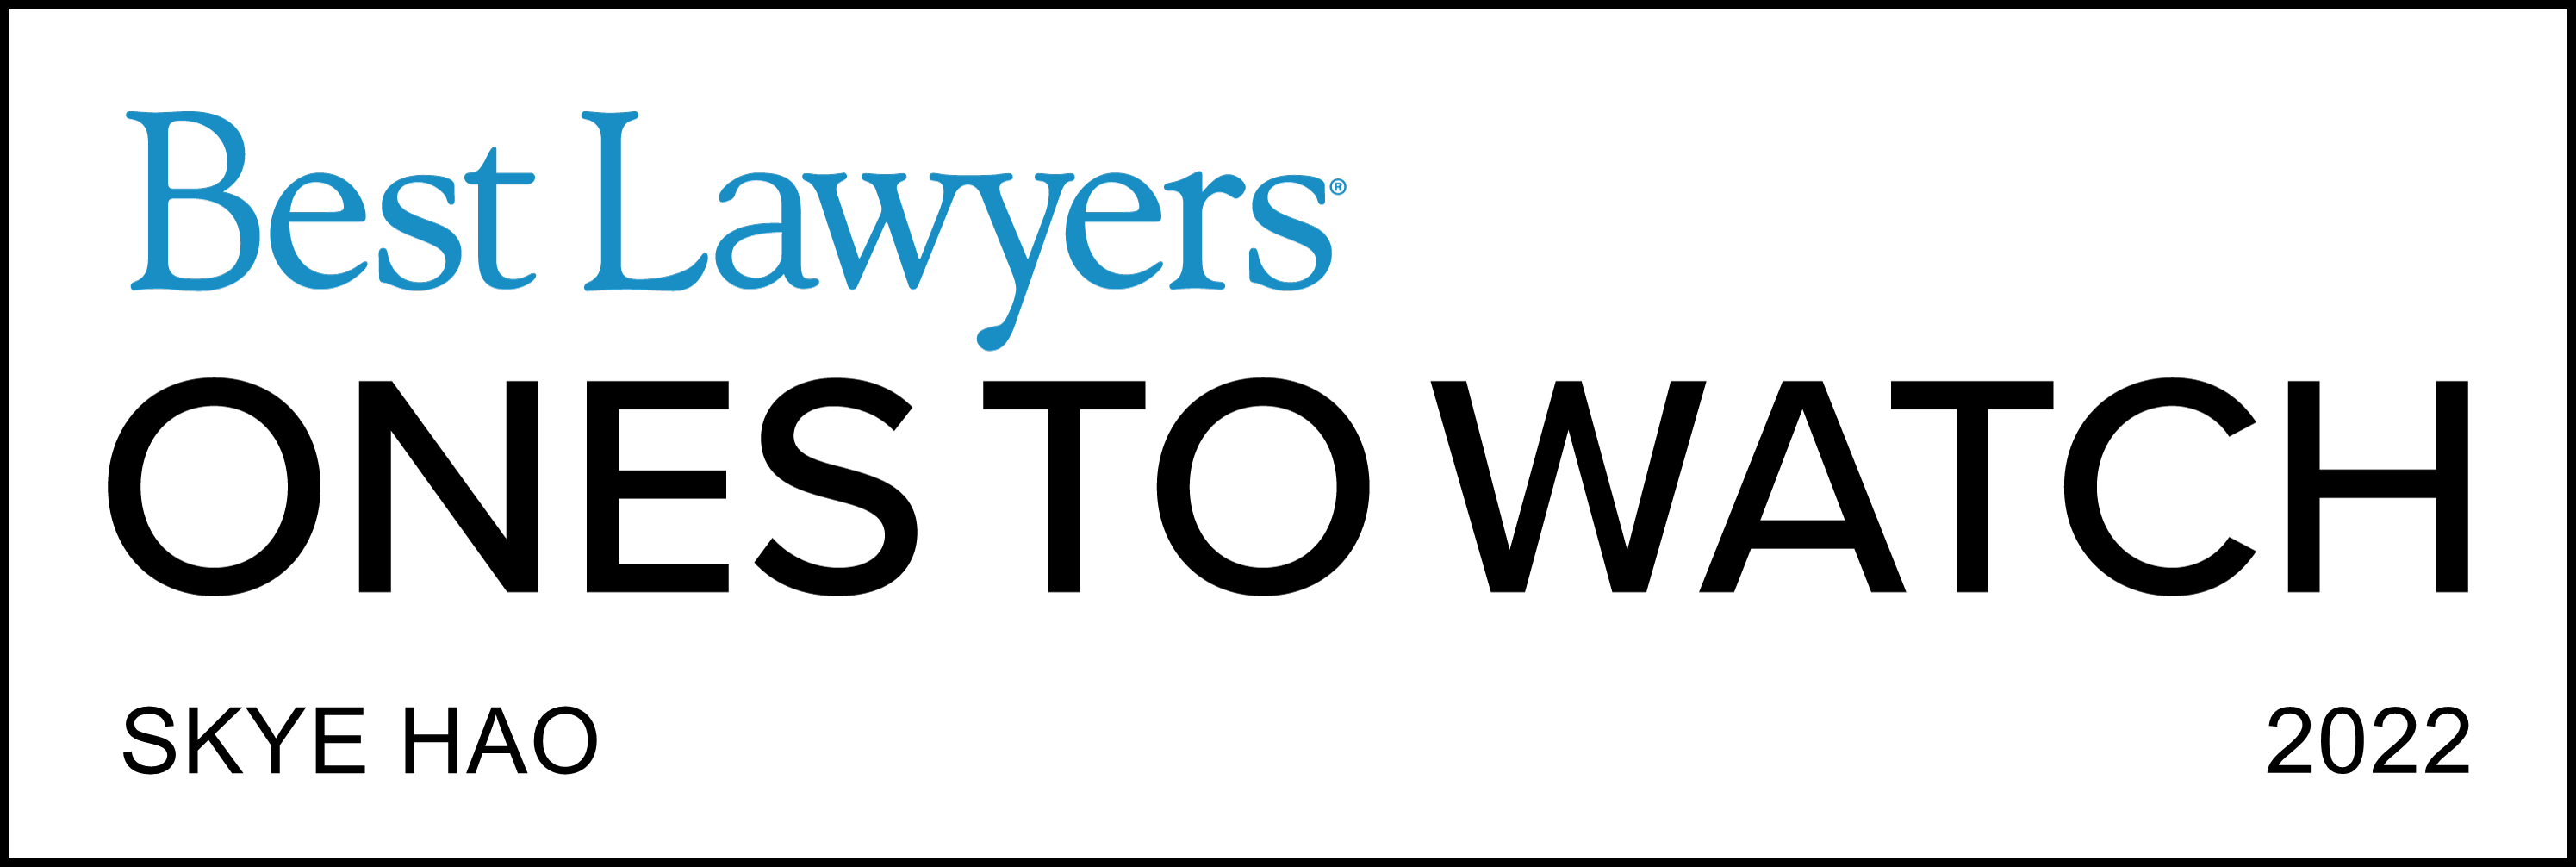 Best Lawyers - Ones to Watch Award